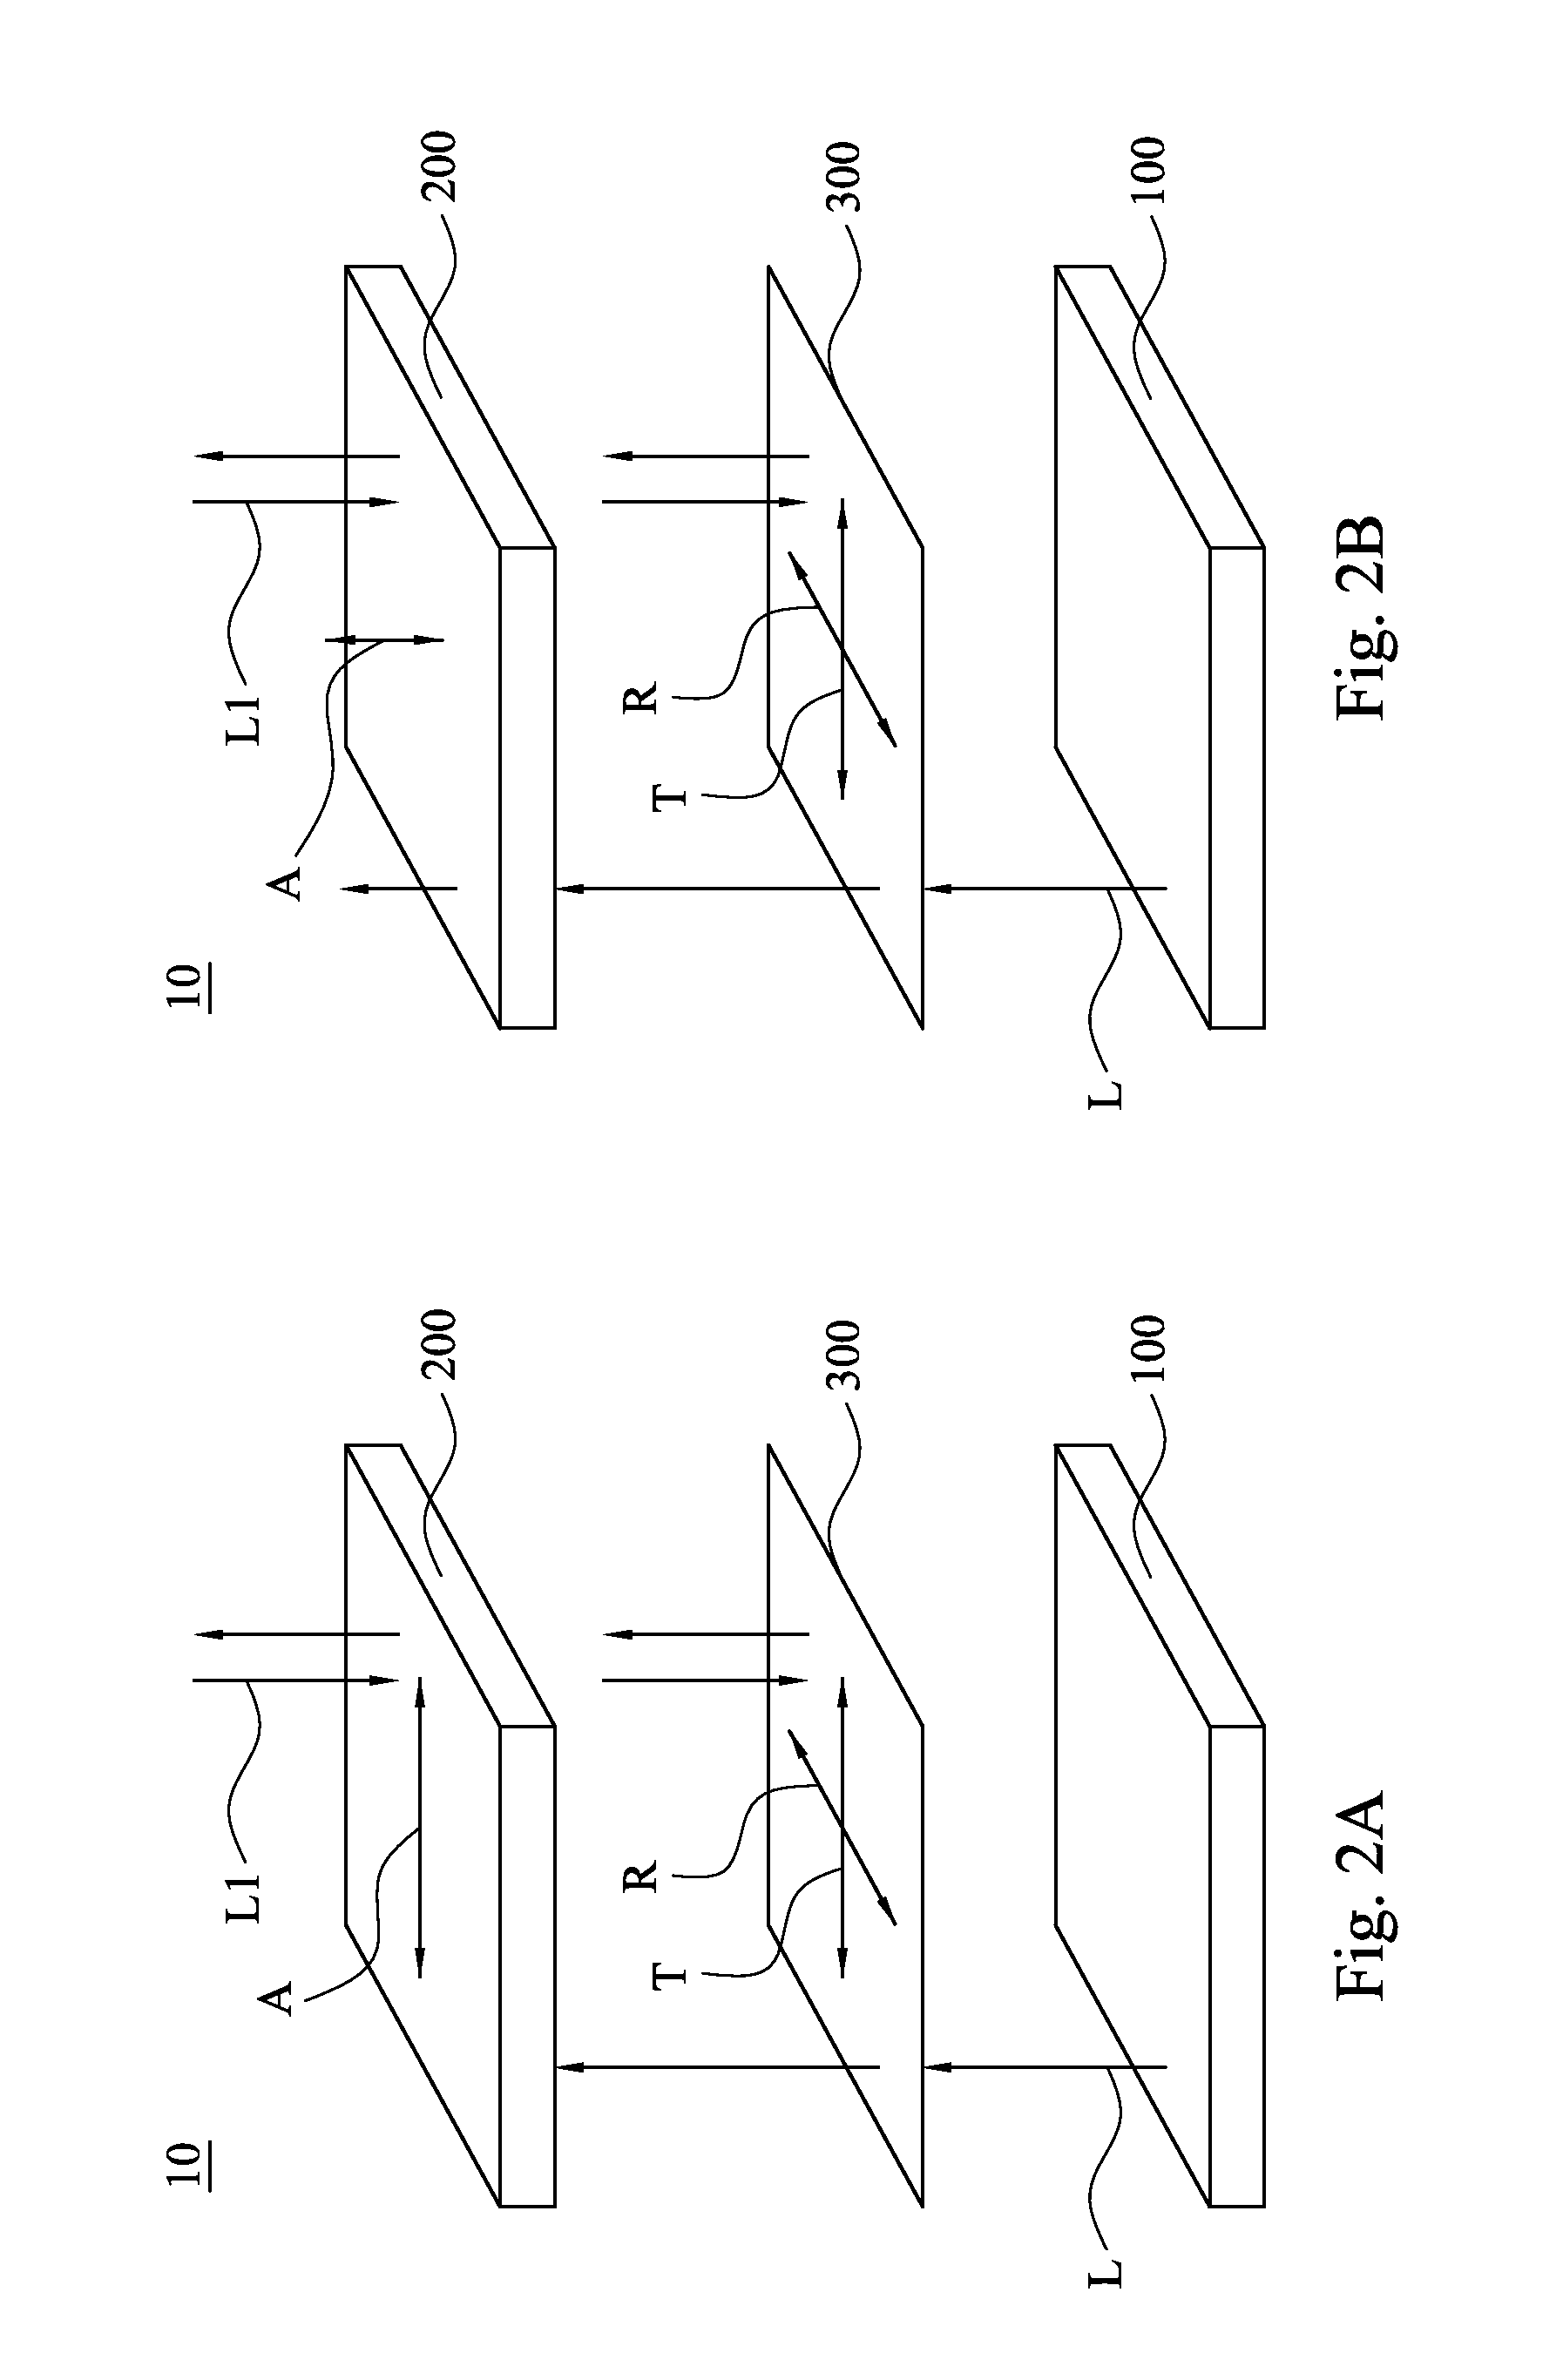 Display device switchable between mirror mode and display mode